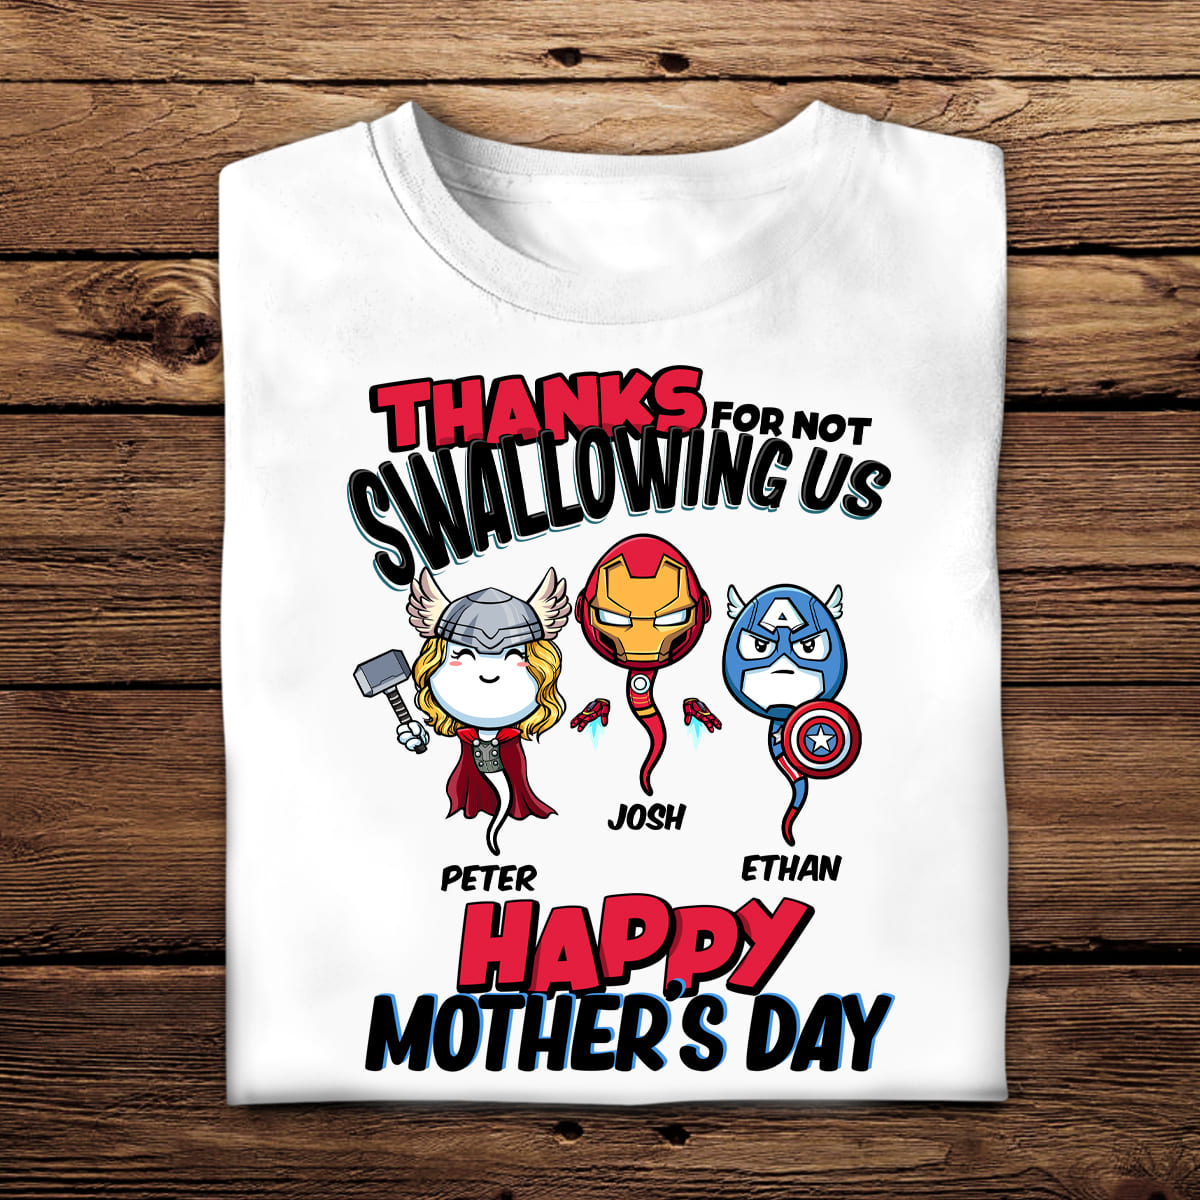 Multiverse Thanks For Not Swallowing Us - Personalized Shirt - Mother's Day, Funny, Birthday Gift For Mom, Mother, Wife Bannergg_3b974650-c3fe-46a7-92f7-e9d24348b9e6.jpg?v=1682072210